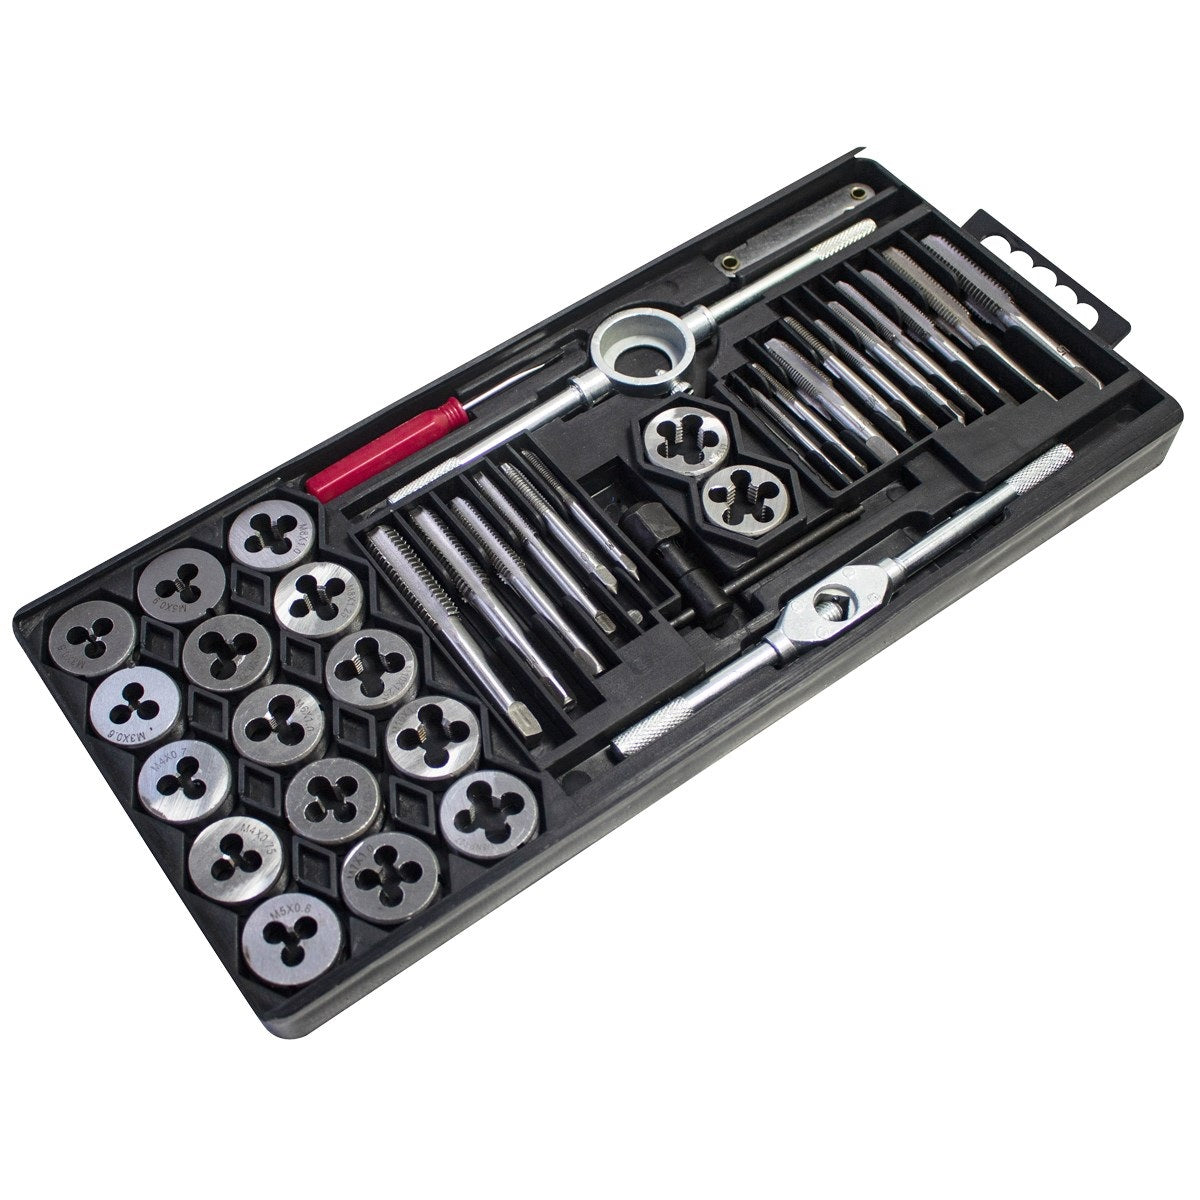 Amtech S1155 Metric Tap & Die 40Pce Set - Premium Engineering from DK Tools - Just $21.0! Shop now at W Hurst & Son (IW) Ltd